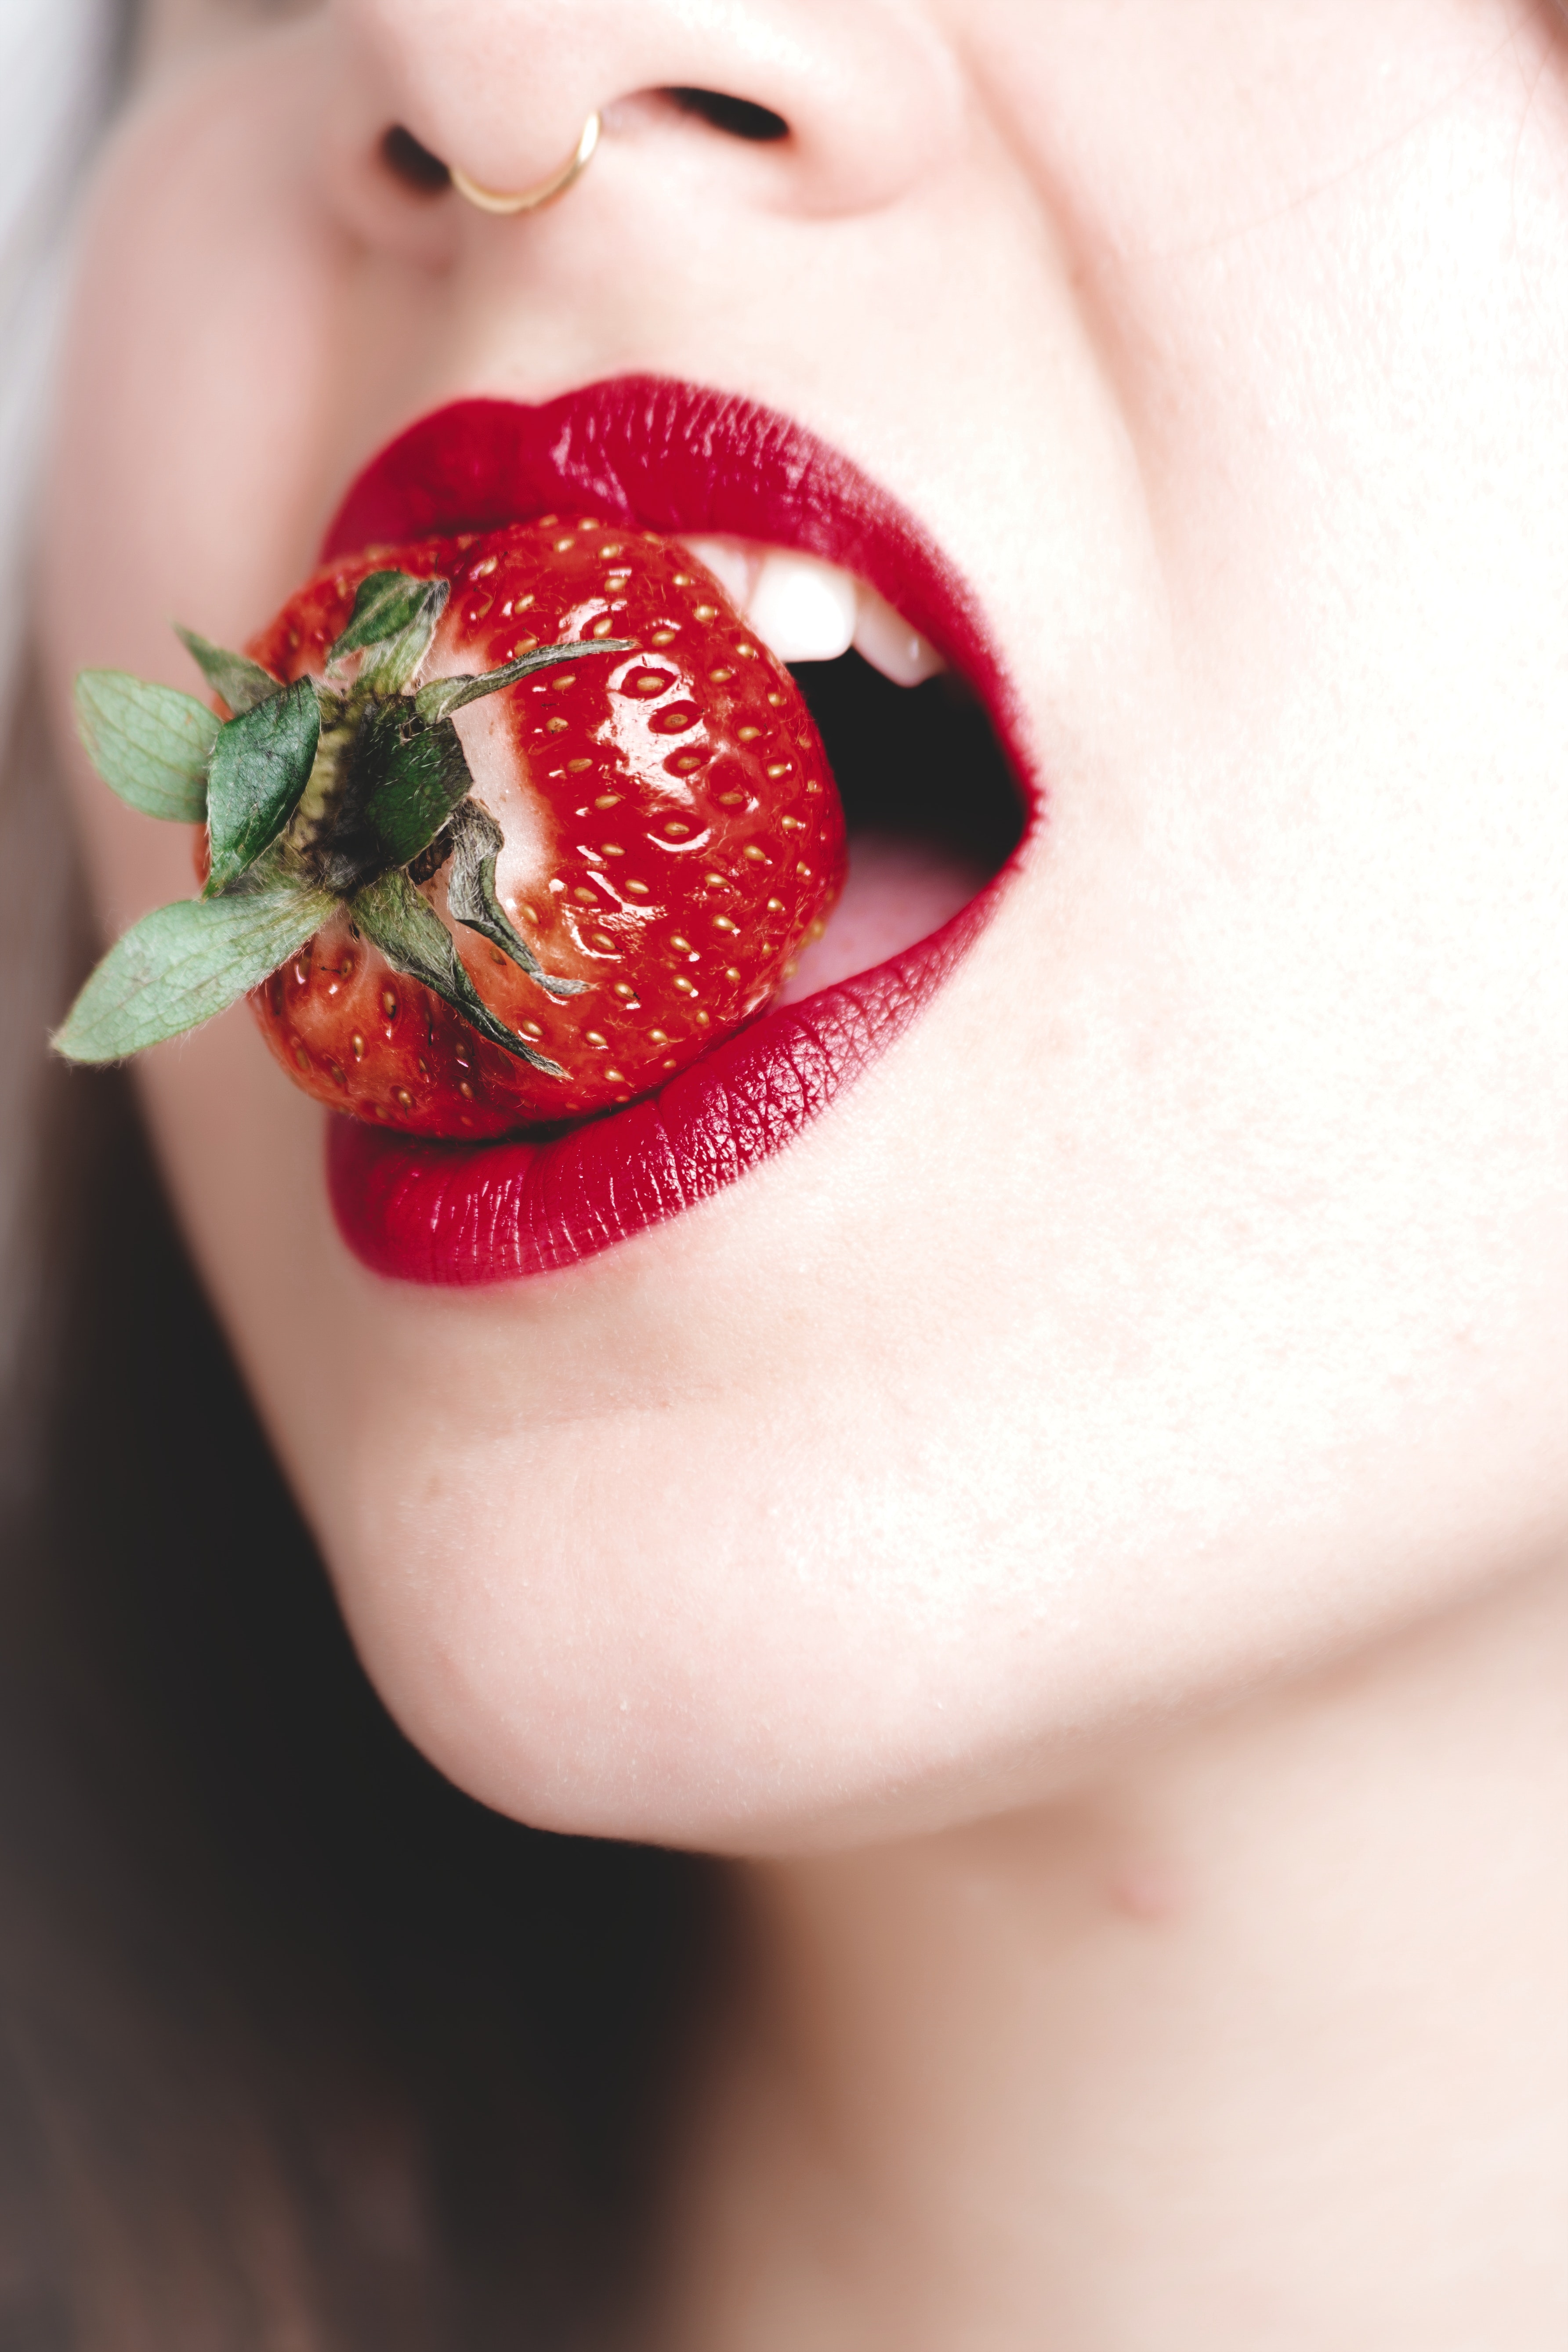 Woman with red lipstick biting strawberry photo